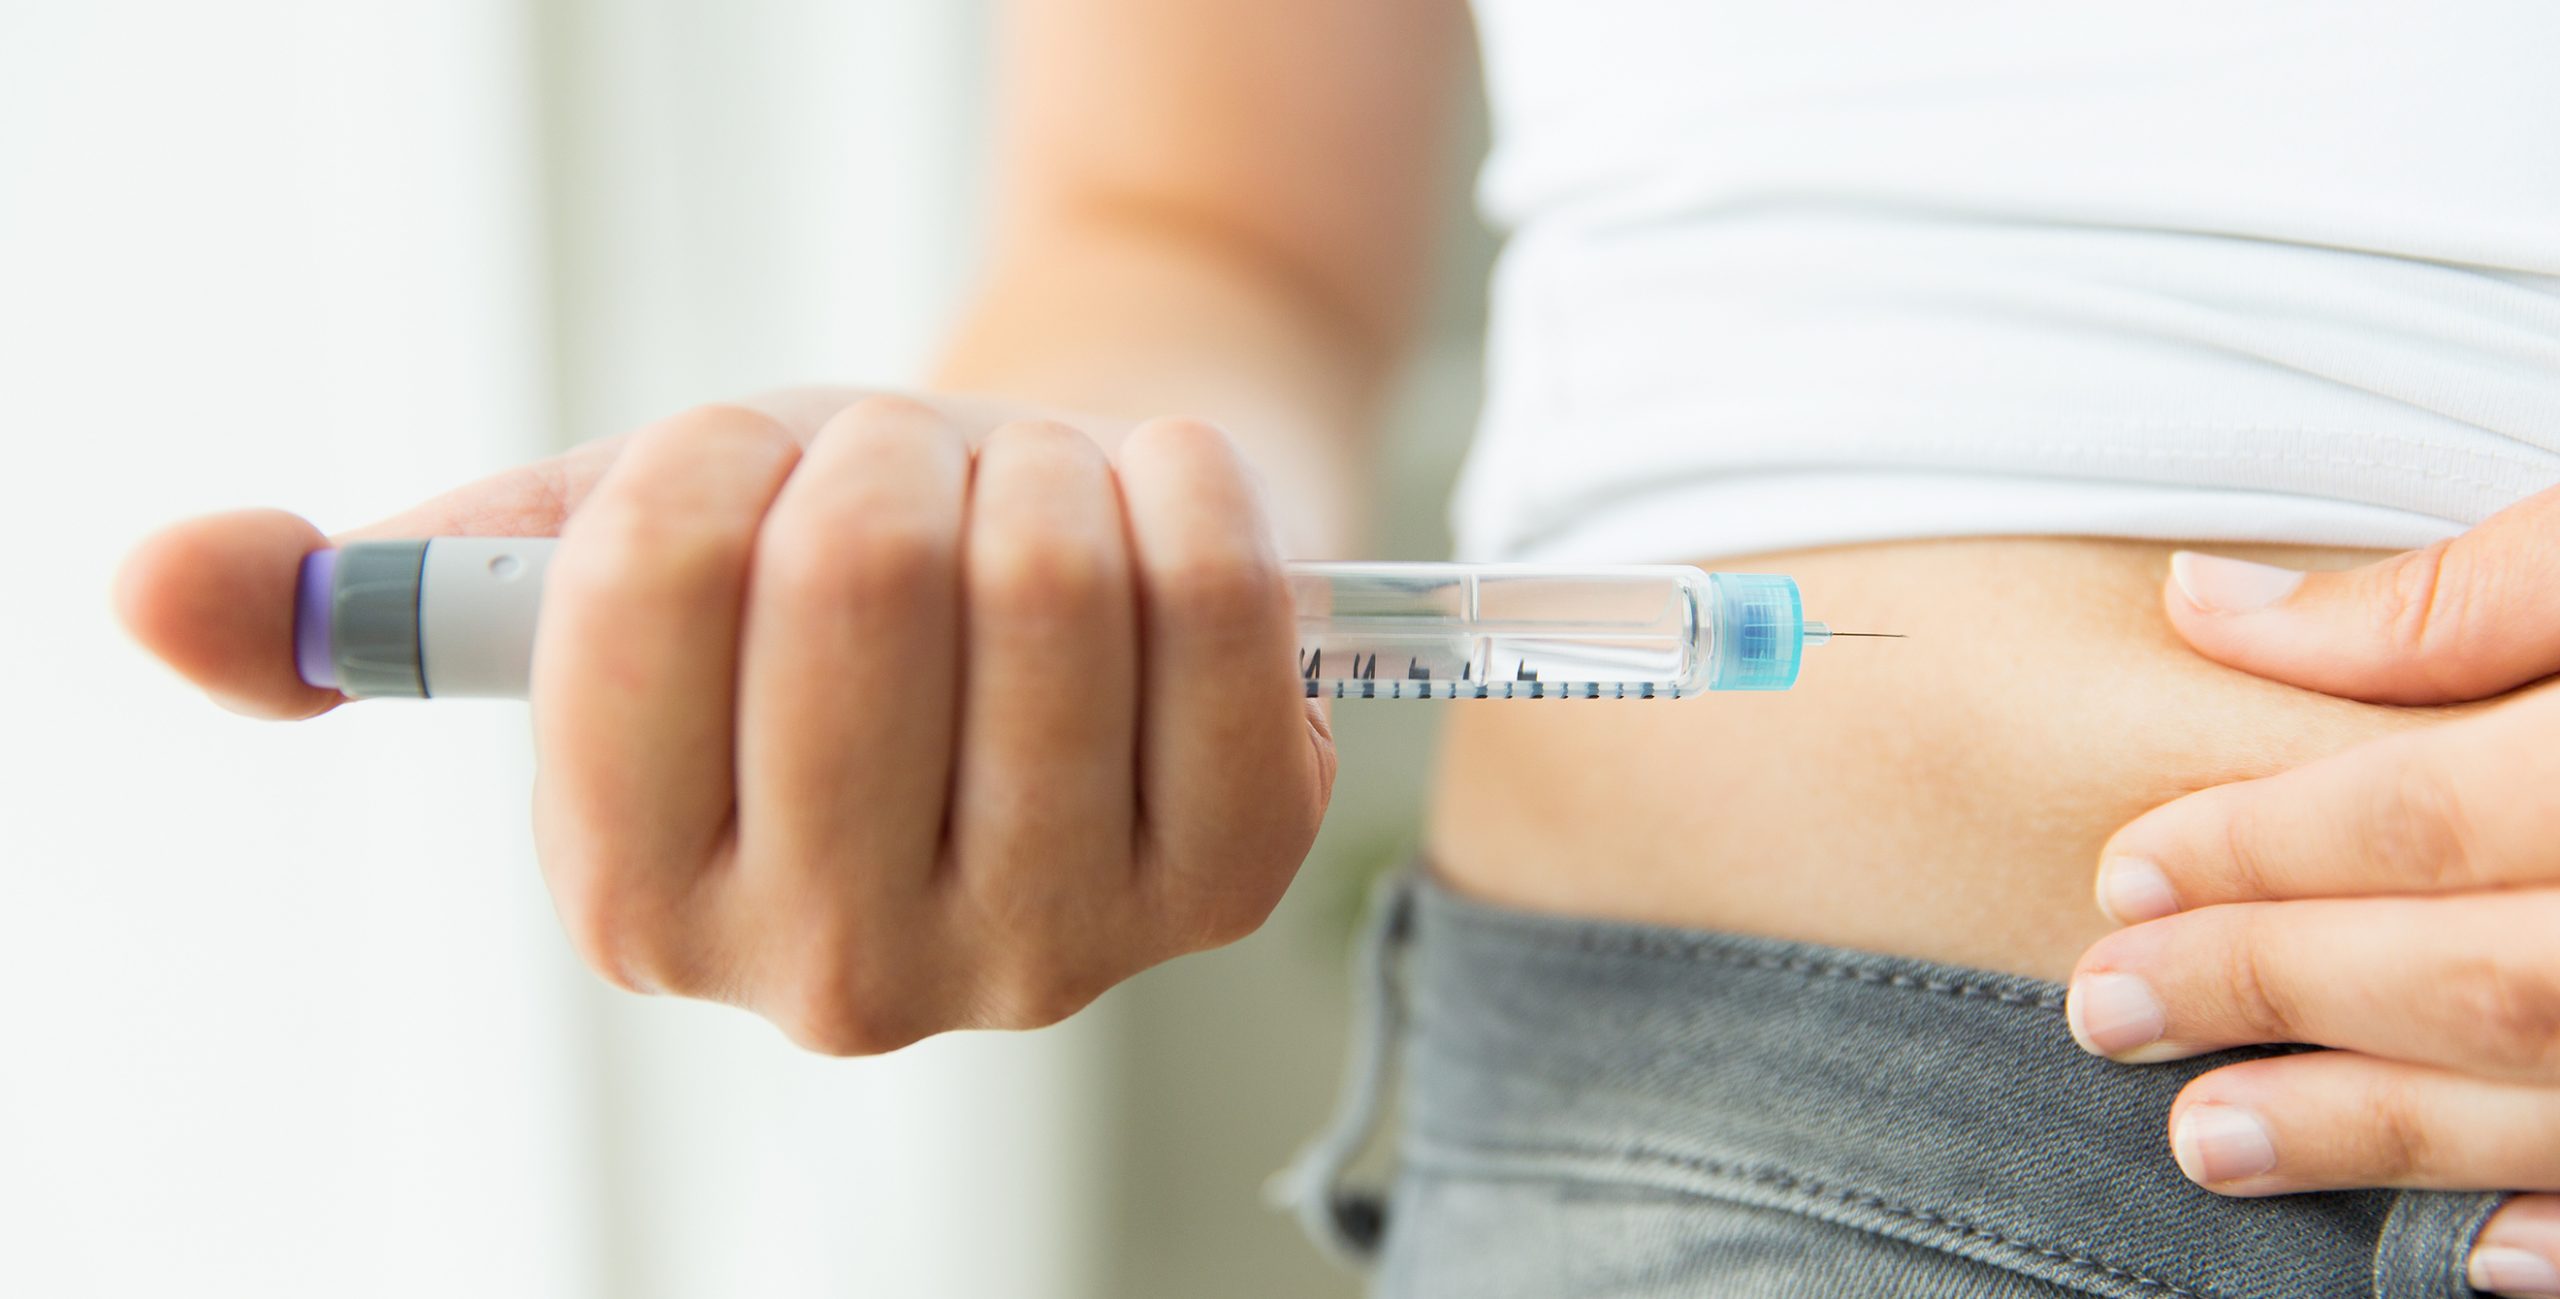 Utah has enacted a law that will cap out-of-pocket costs for insulin at $30 a month on state-regulated health plans.